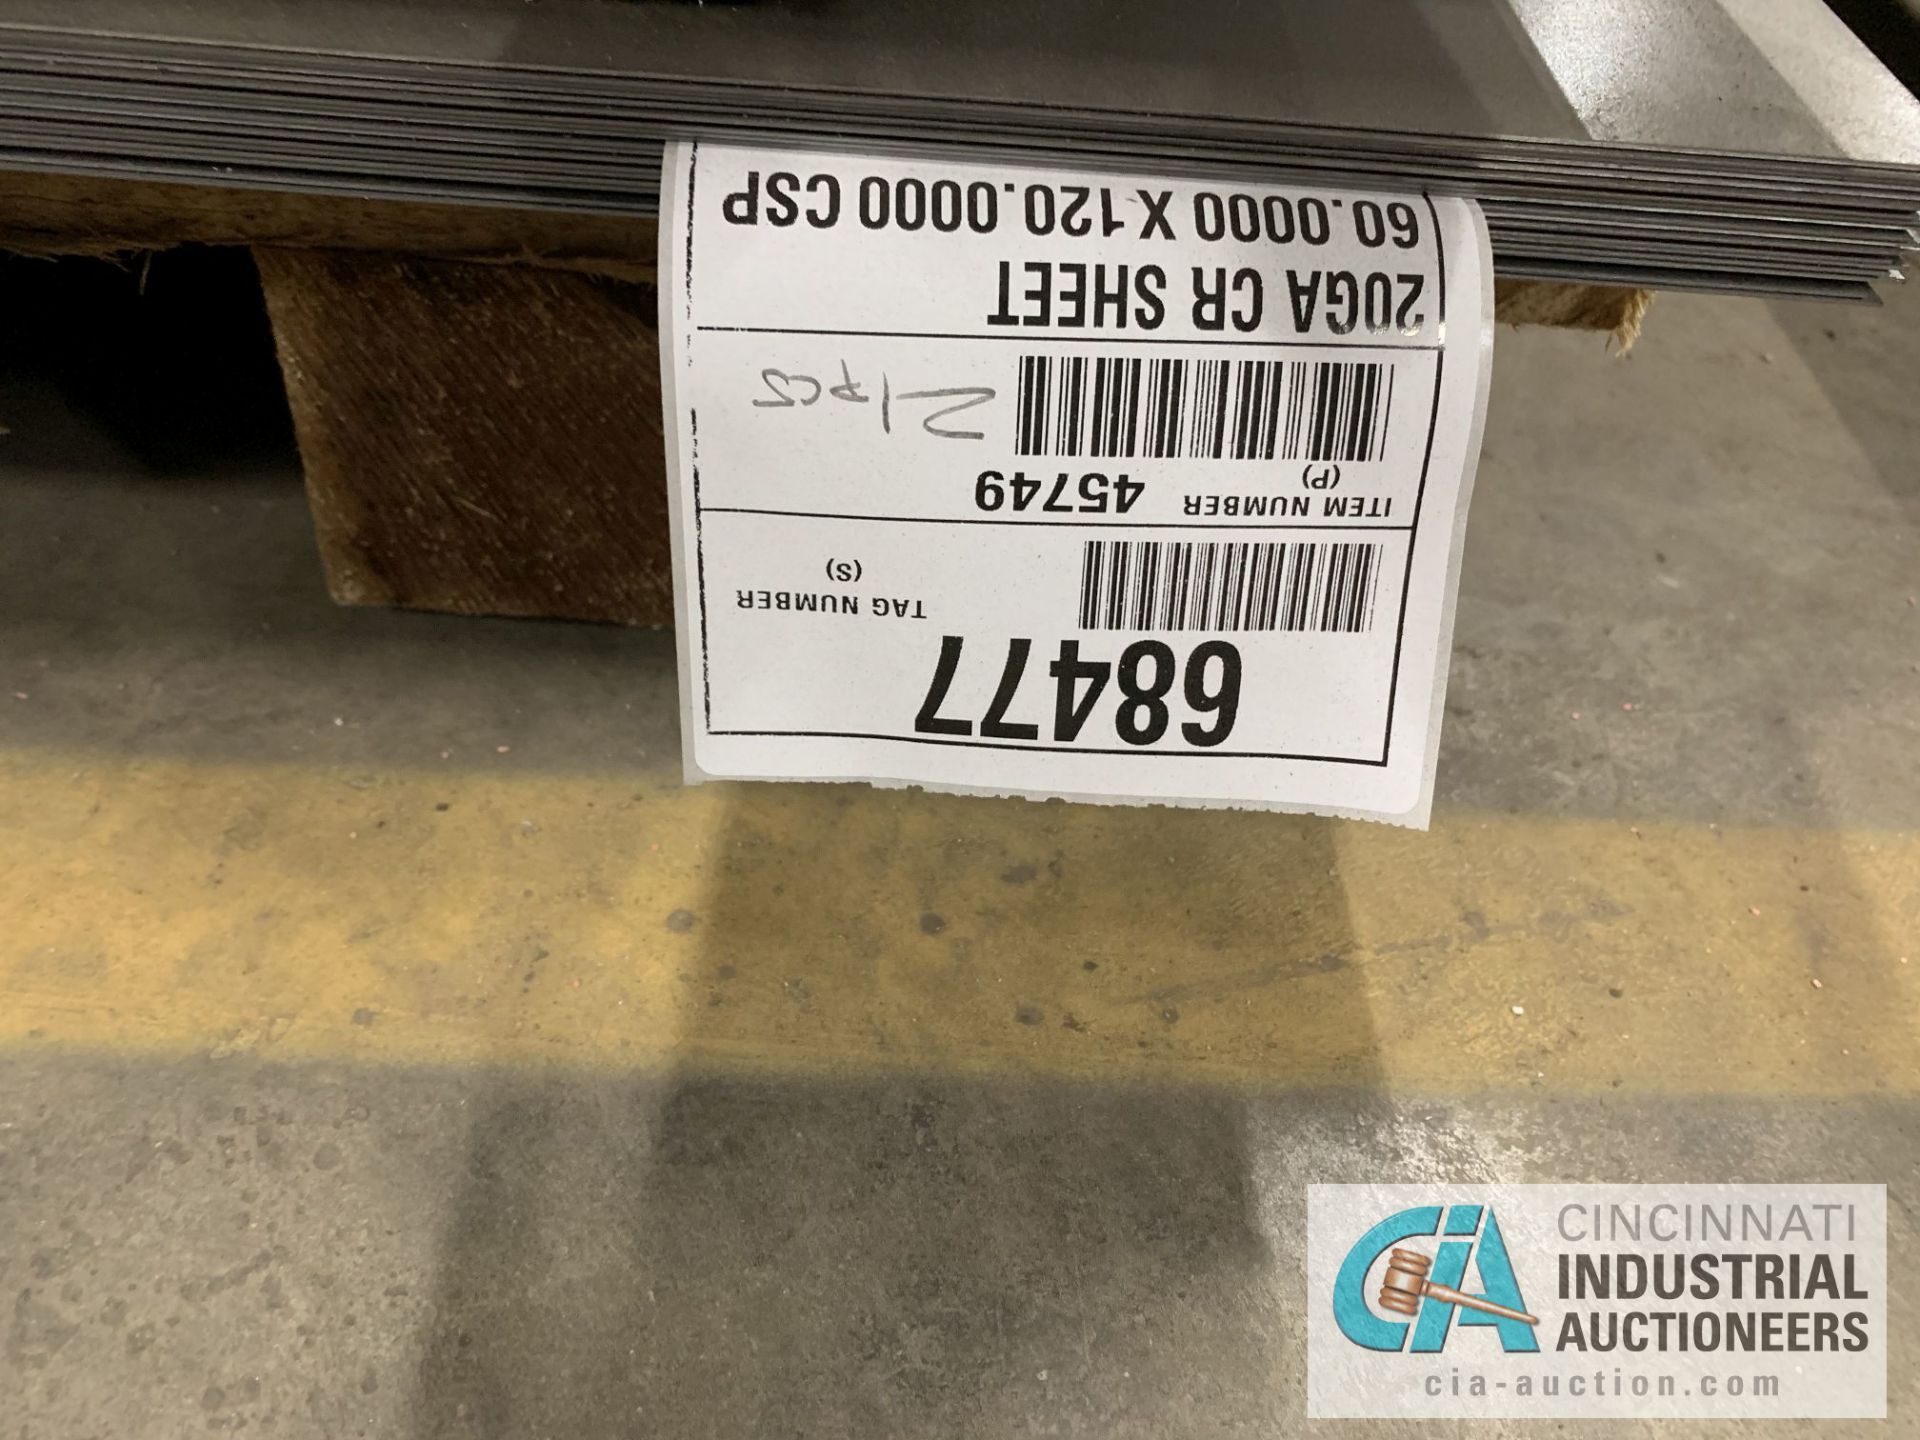 (LOT) APPROX. 41,356 LBS. UNCOATED SHEET STEEL, 1-STACK, 8-BUNDLES, SEE INVENTORY FOR LISTING. - Image 10 of 10